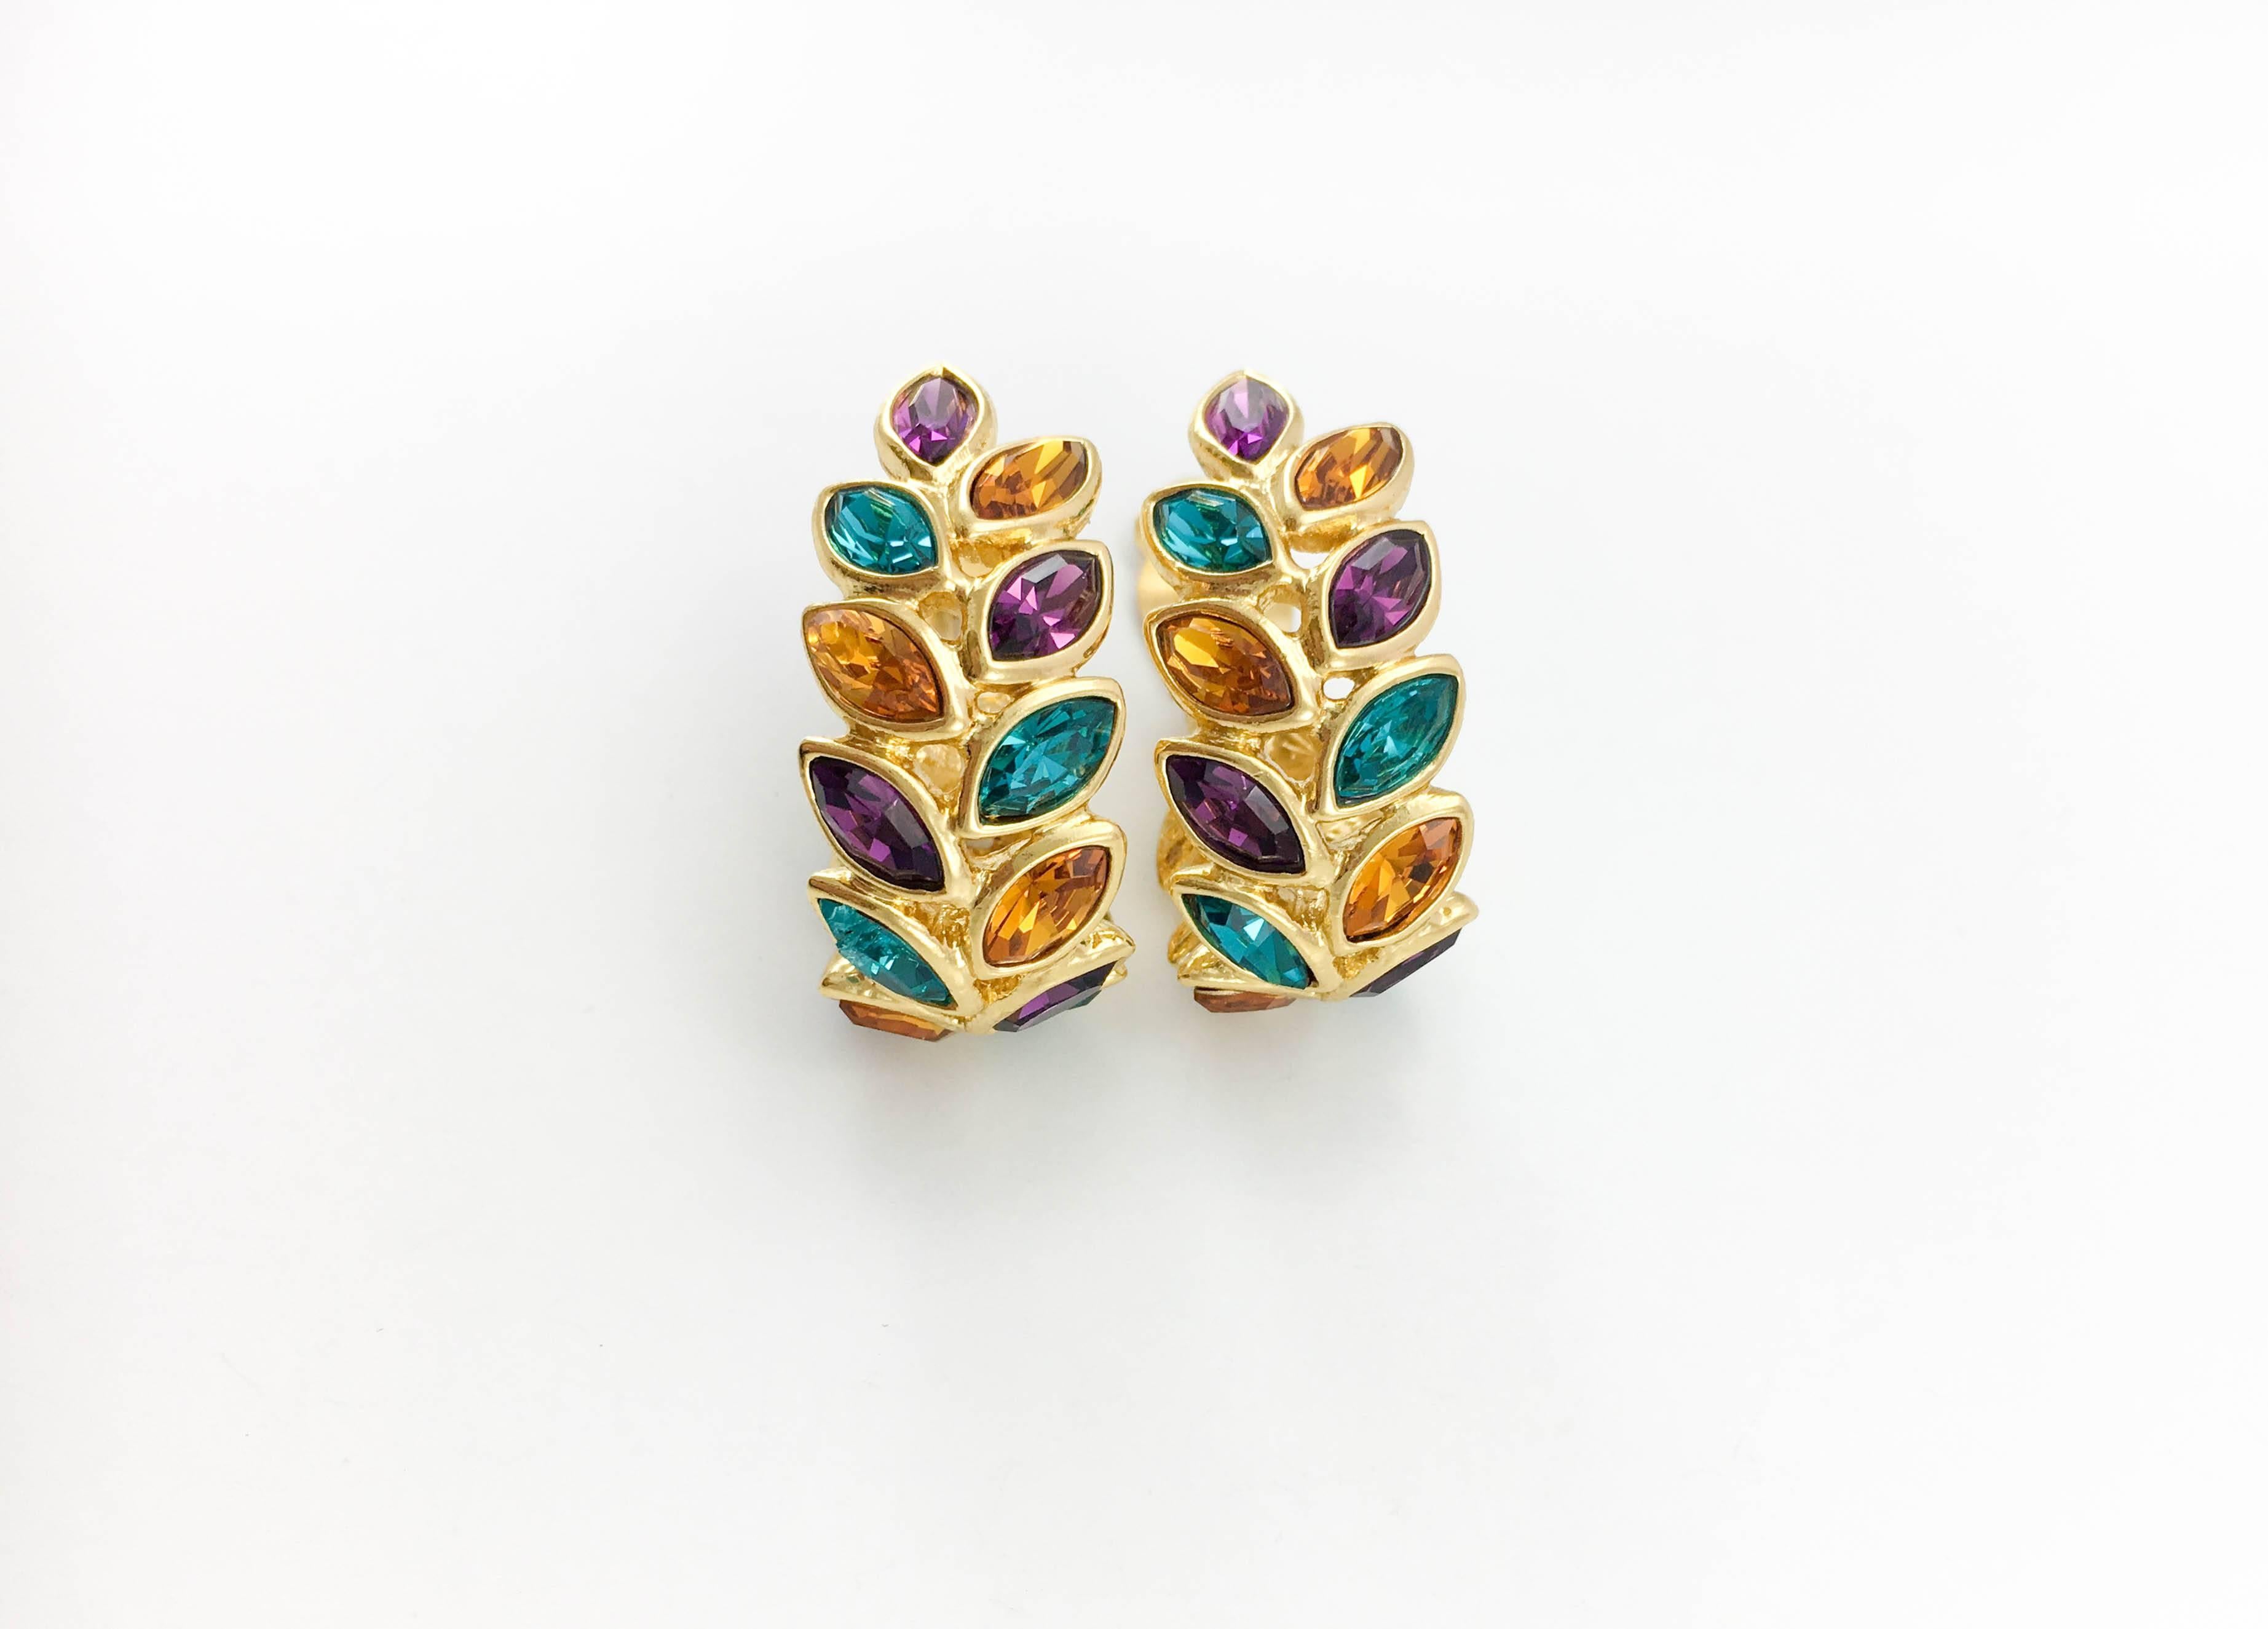 Vintage Yves Saint Laurent Multi-Coloured Glass Beads Clip-On Earrings. These beautiful earrings by Yves Saint Laurent date back from the 1980’s. In gilt metal, they are embellished with blue, red, purple, amber and green leaf-shaped crystals. The